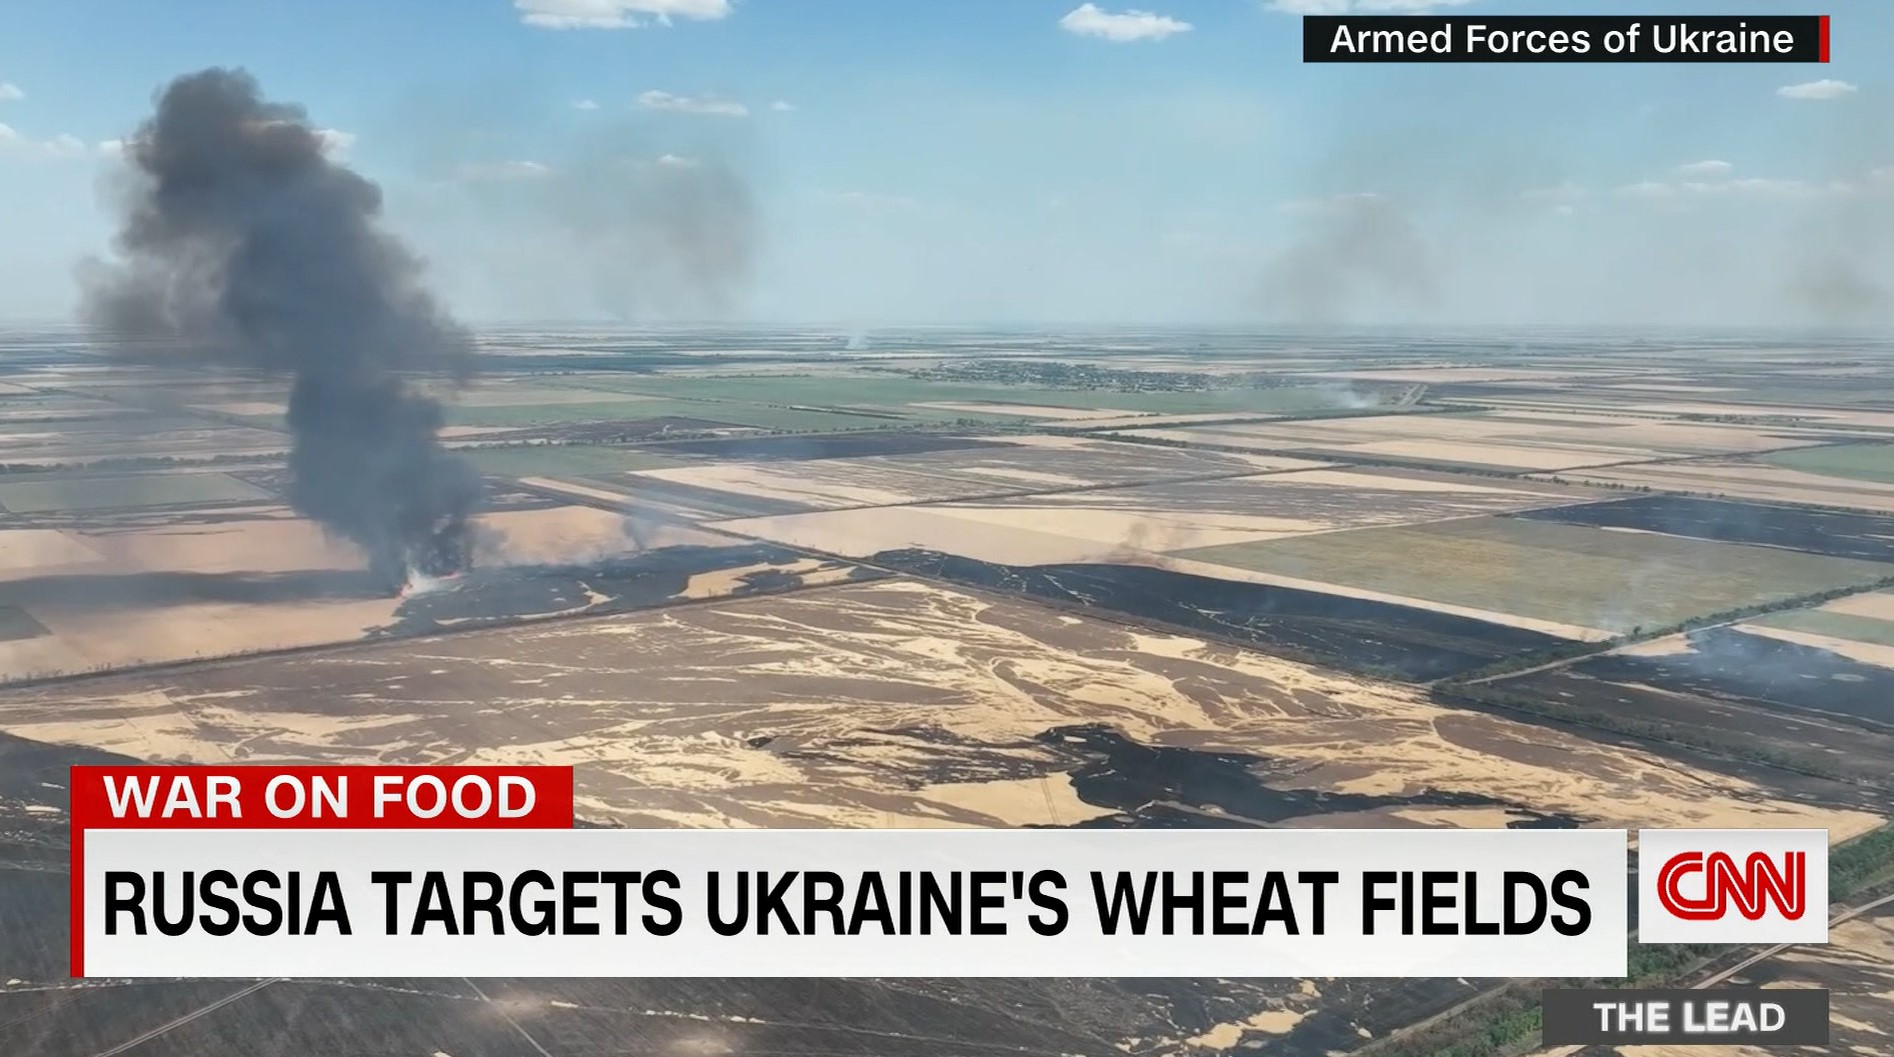 CNN image of burning Ukraine wheat fields from Russian military shelling impacting wheat farmers